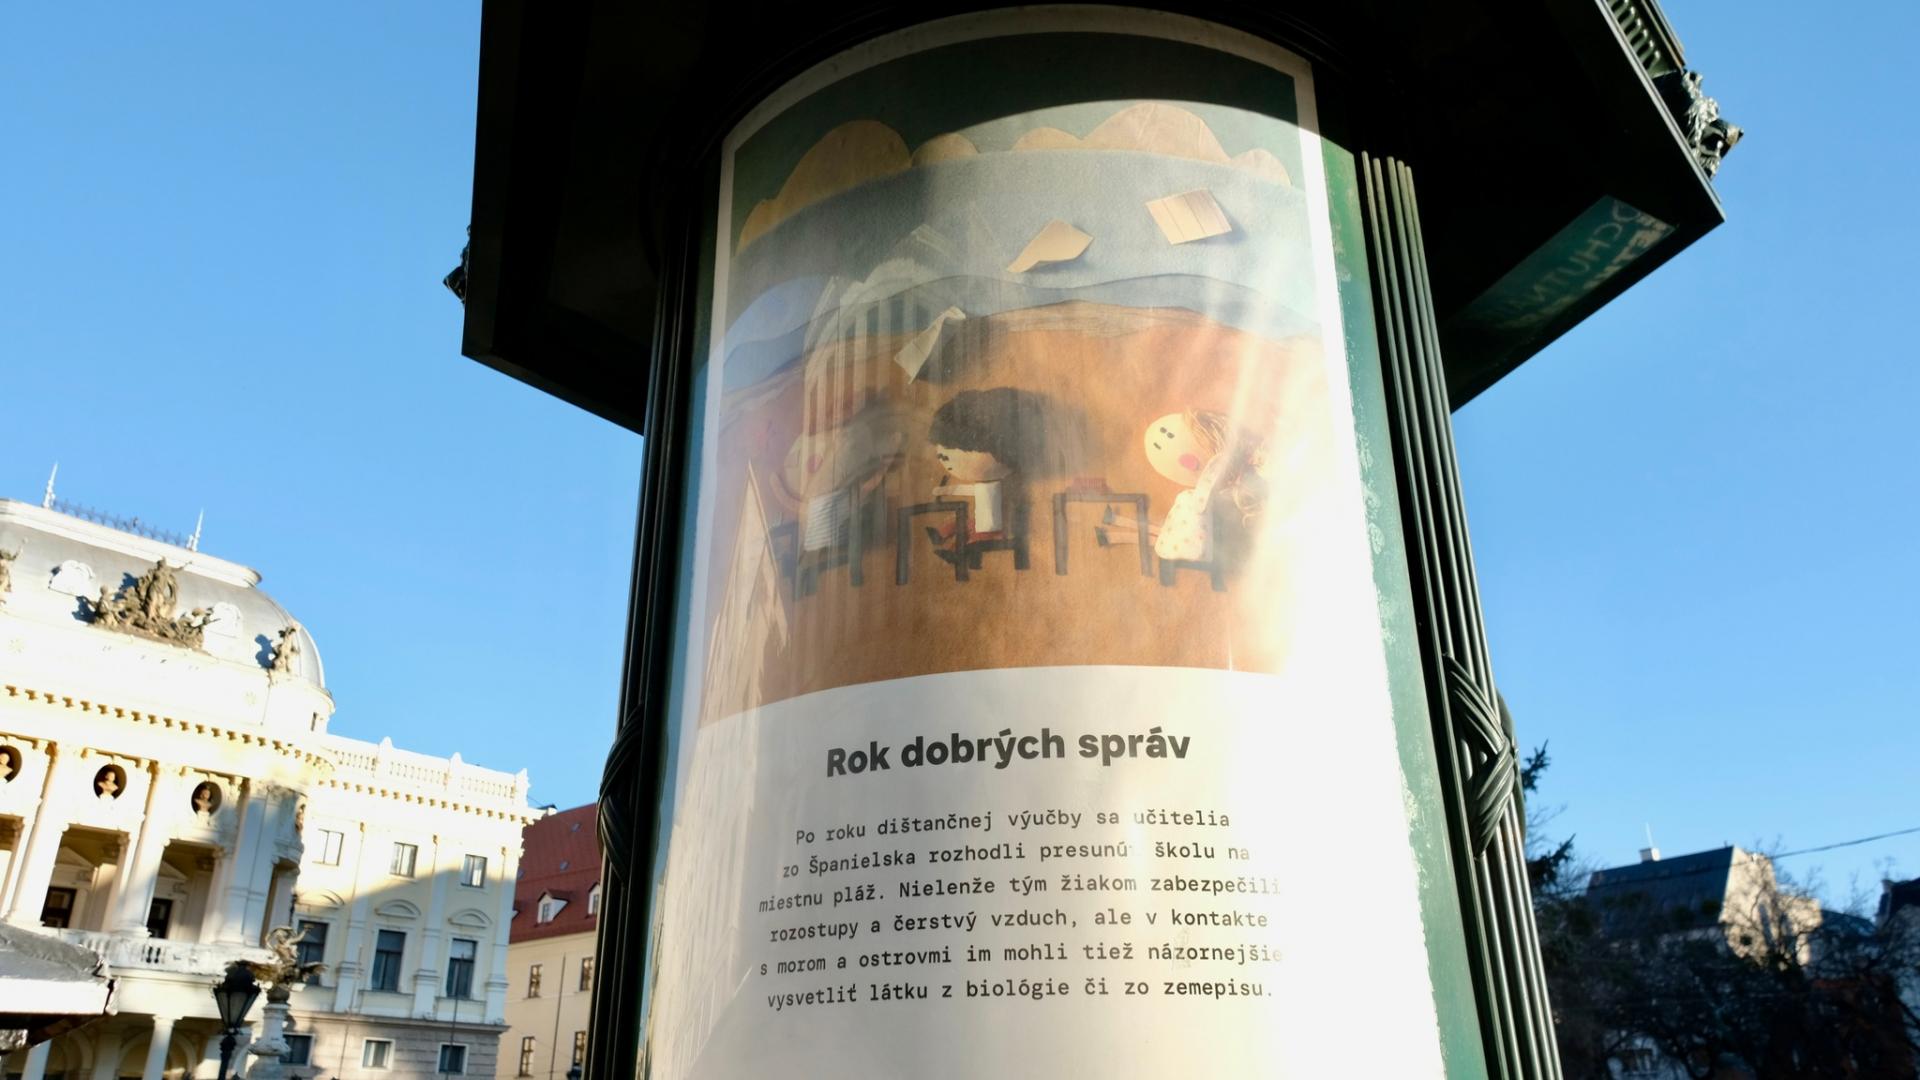 As part of this collaboration, beautiful illustrations and excerpts from the book decorate Bratislava's streets to lift citizens’ spirits. In addition to this, they encourage them to take note of the positive things around them in the new year.